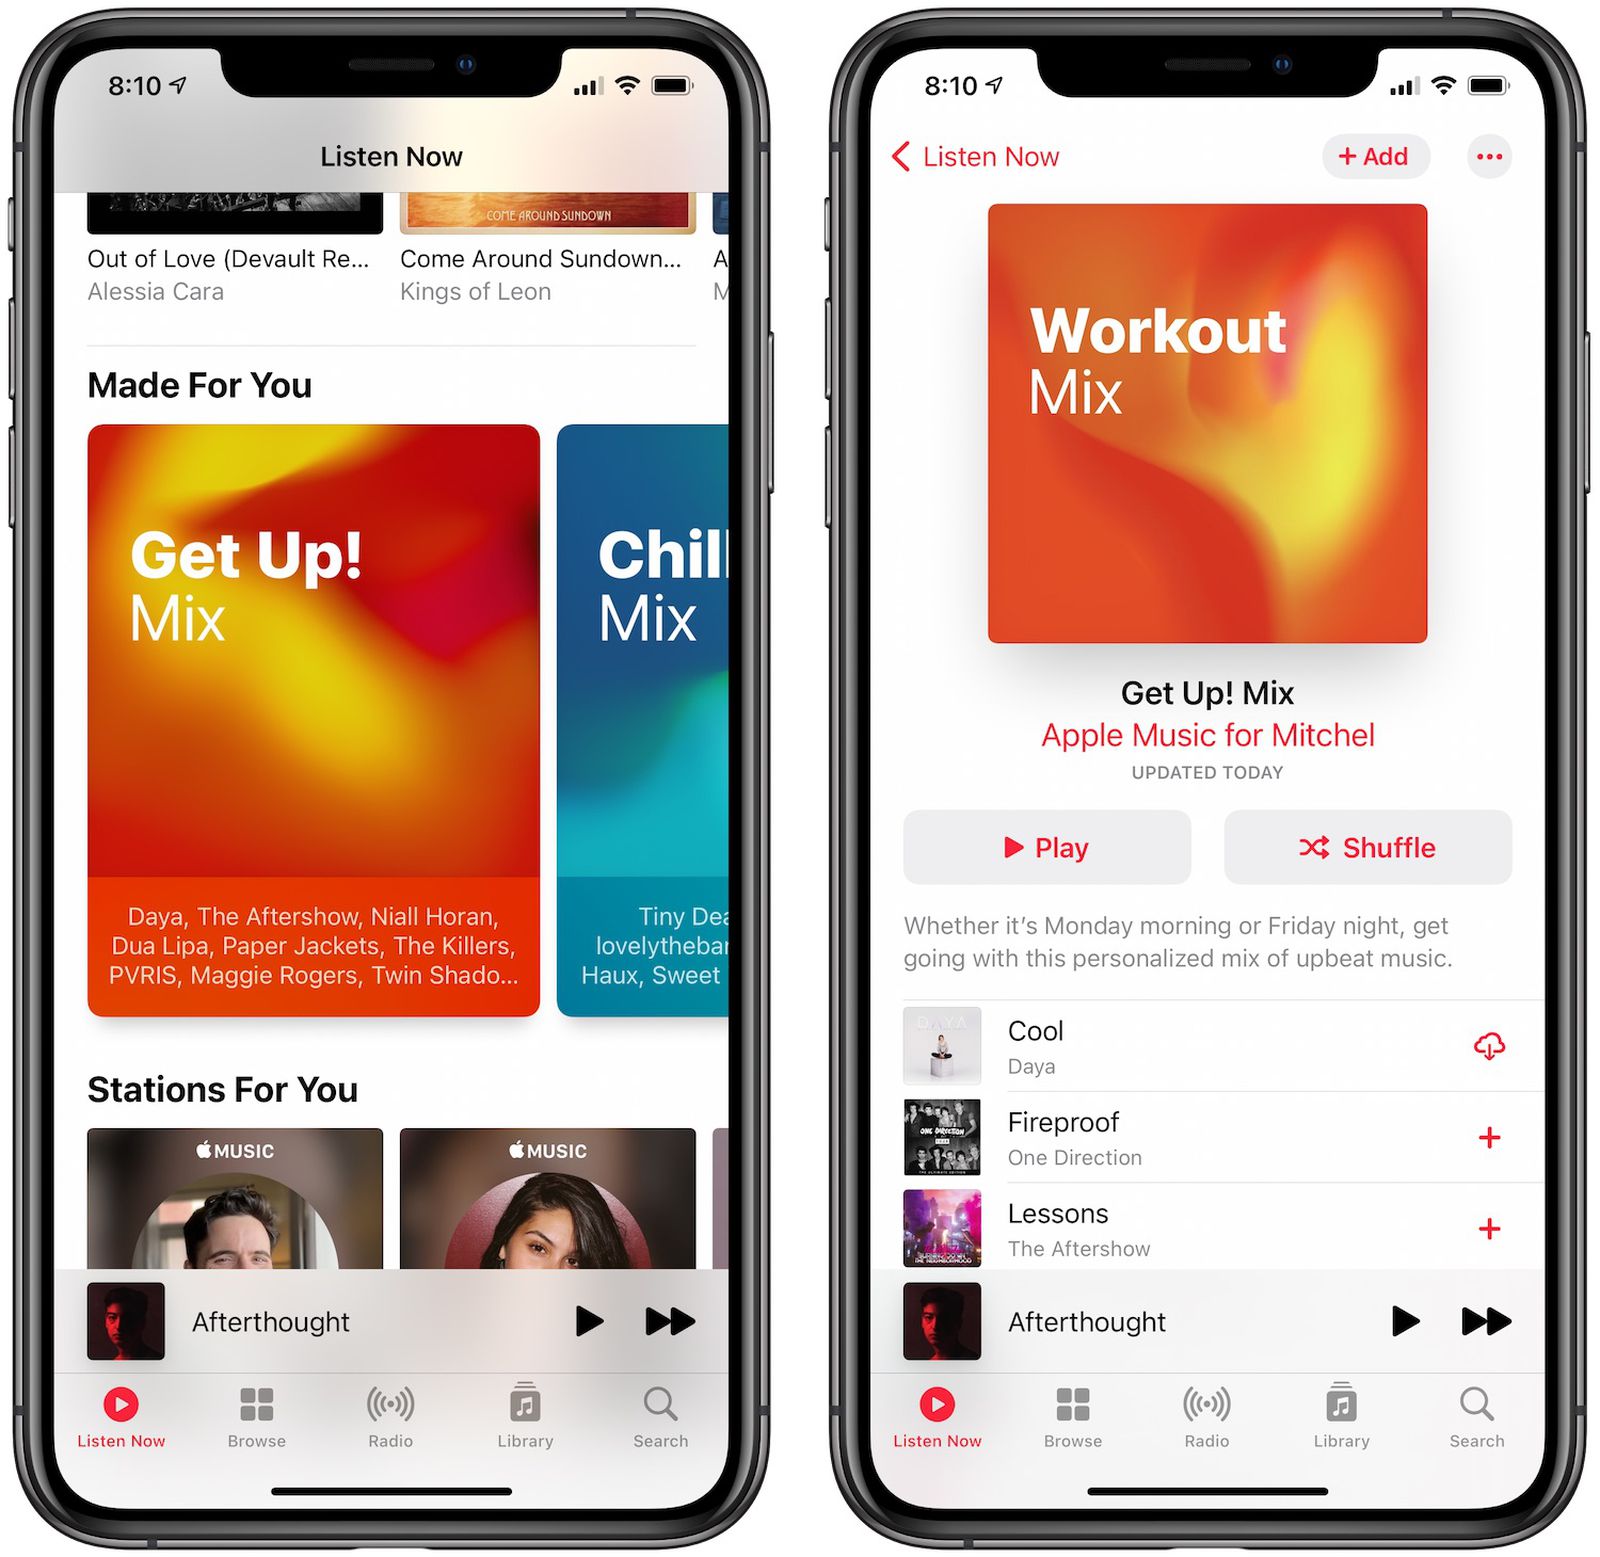 photo of Apple Music Renaming 'Get Up! Mix' to 'Workout Mix' image